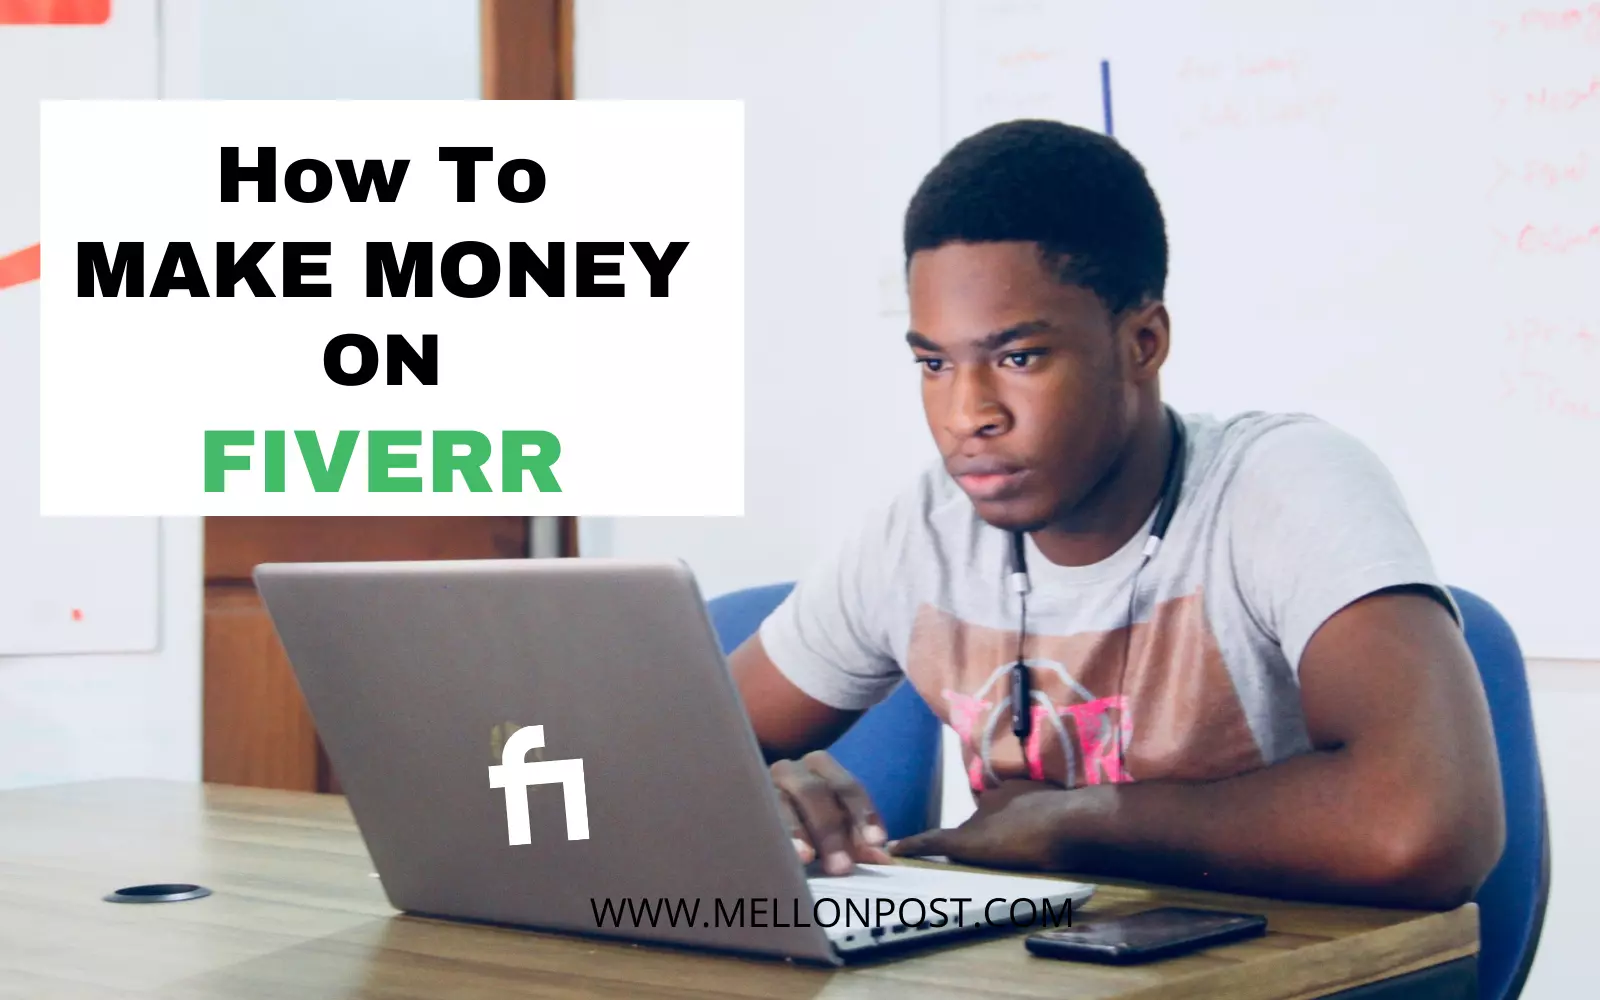 How to make money on Fiverr with just a few simple steps!